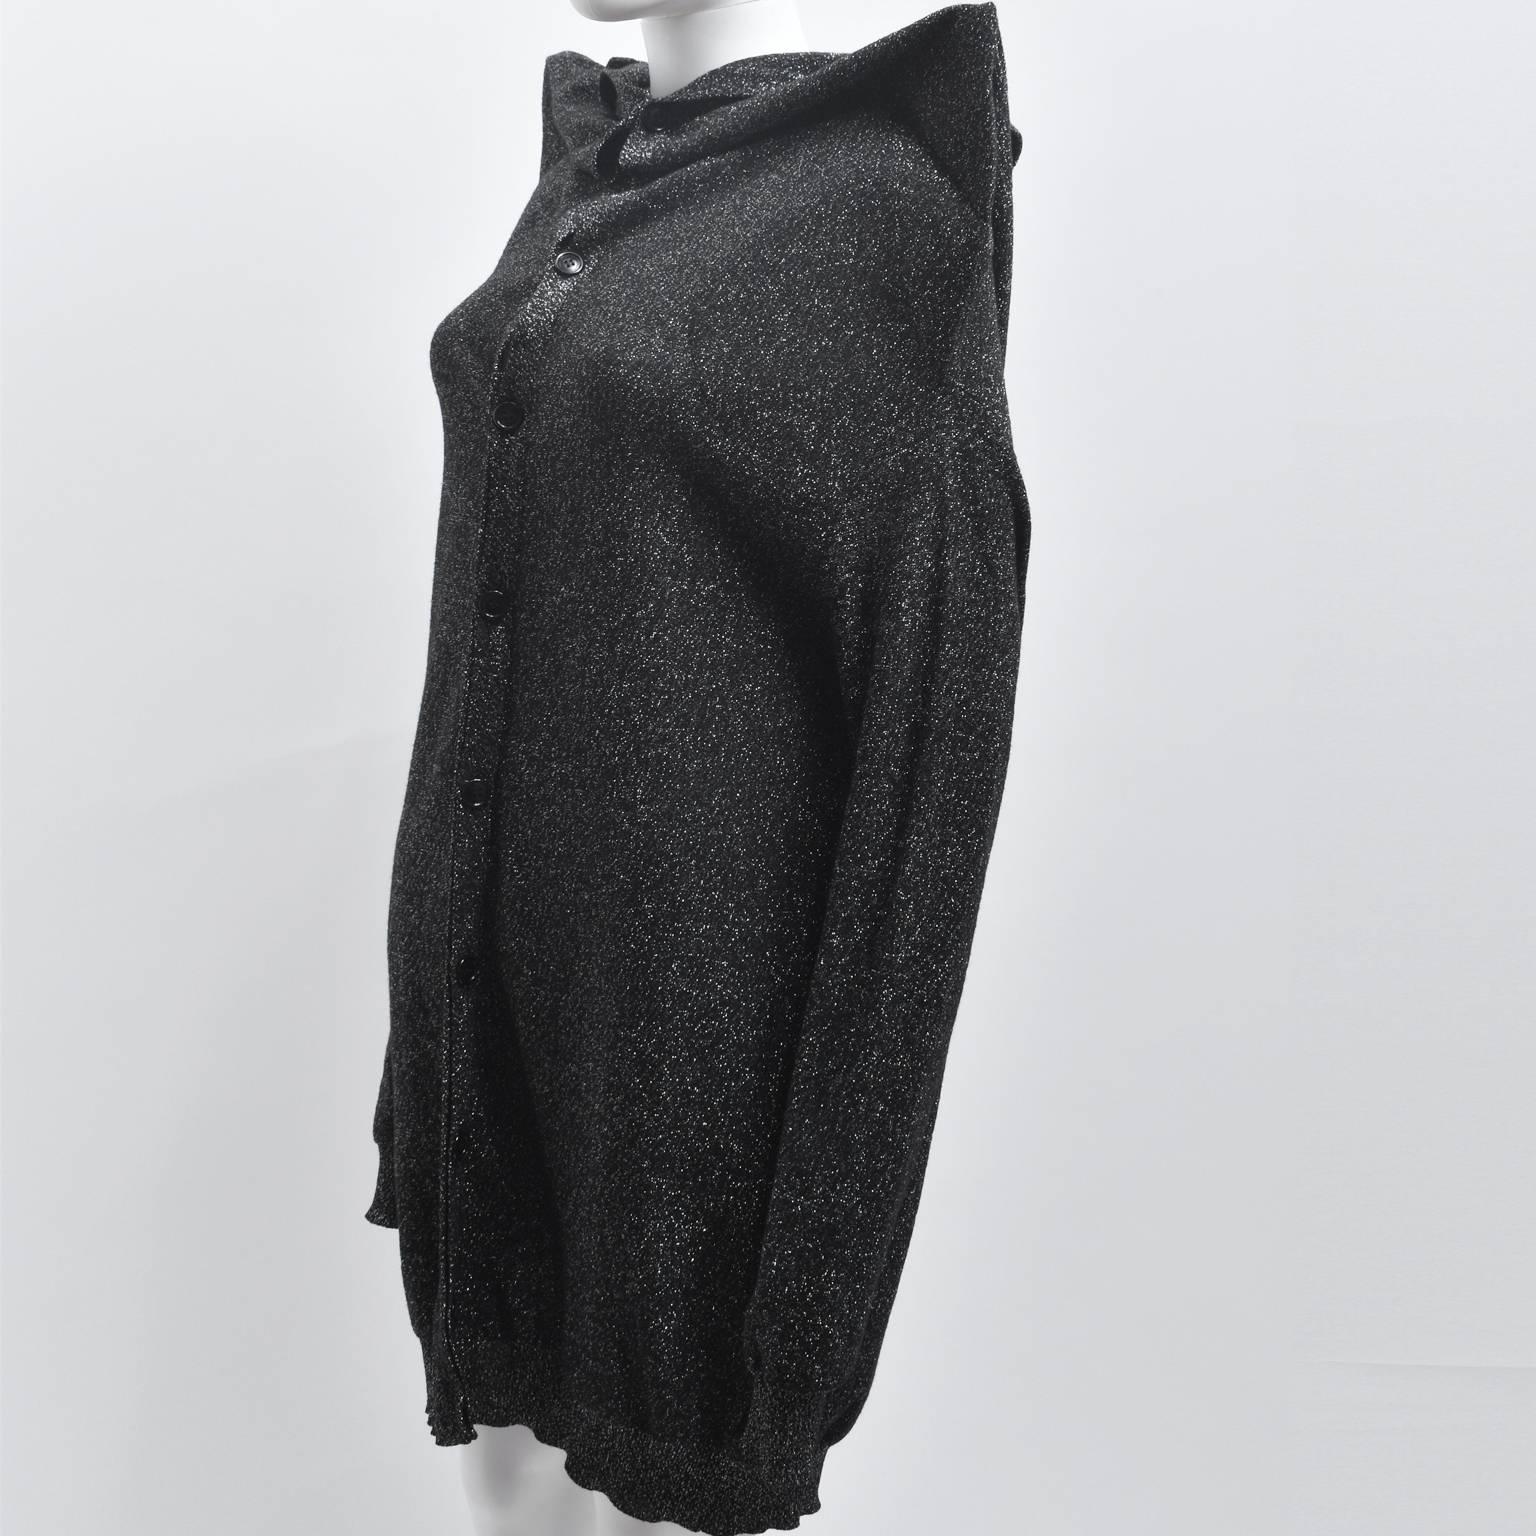 Maison Martin Margiela Black and Silver Glitter Knit with Exaggerated Shoulders In Excellent Condition For Sale In London, GB